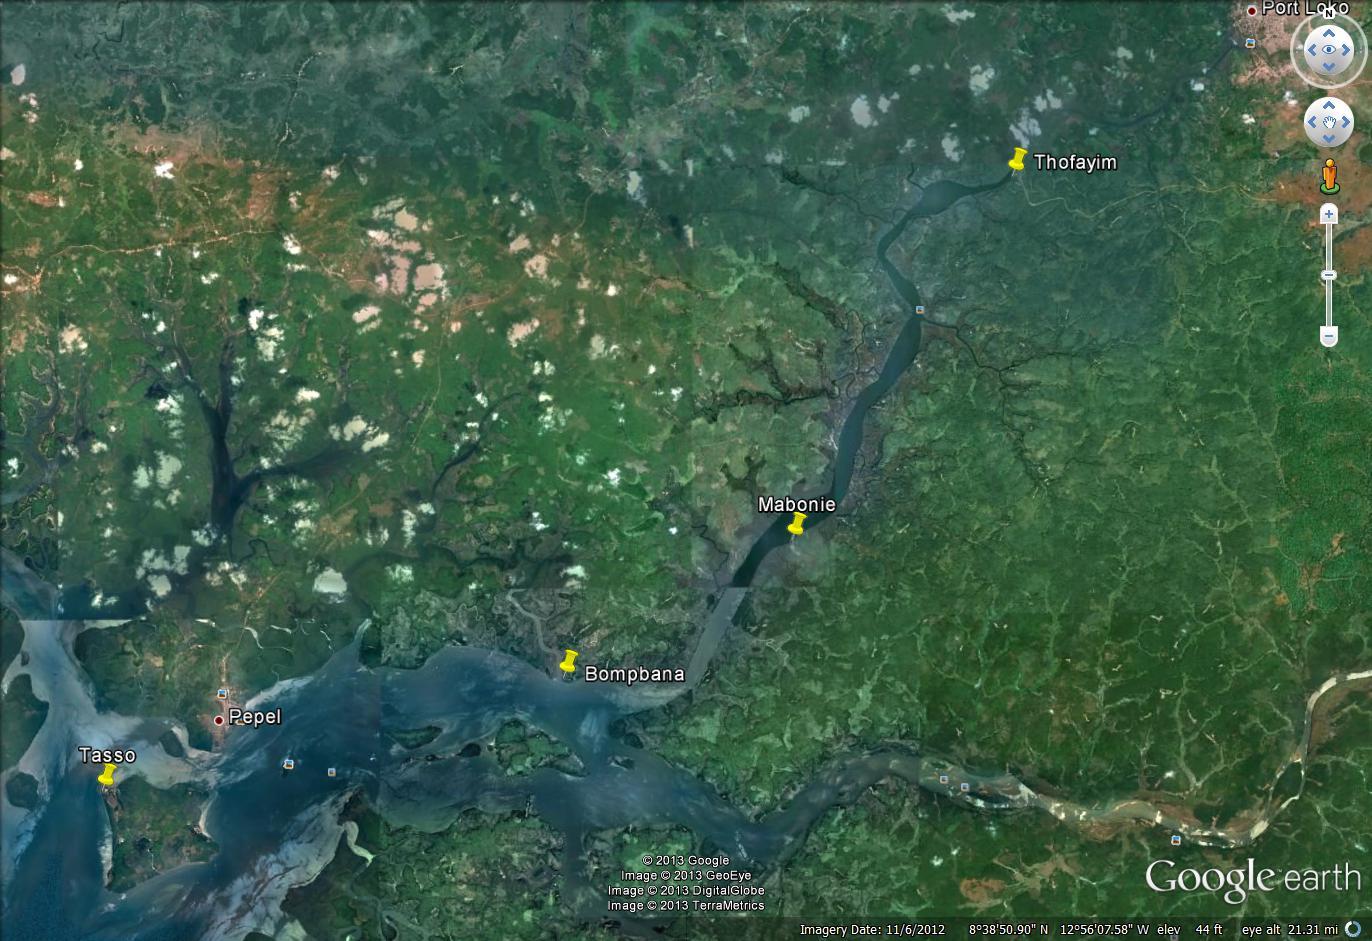 Figure 1: Critical reach of Port Loko river for transport of iron ore to the seaport (Source: Google earth)